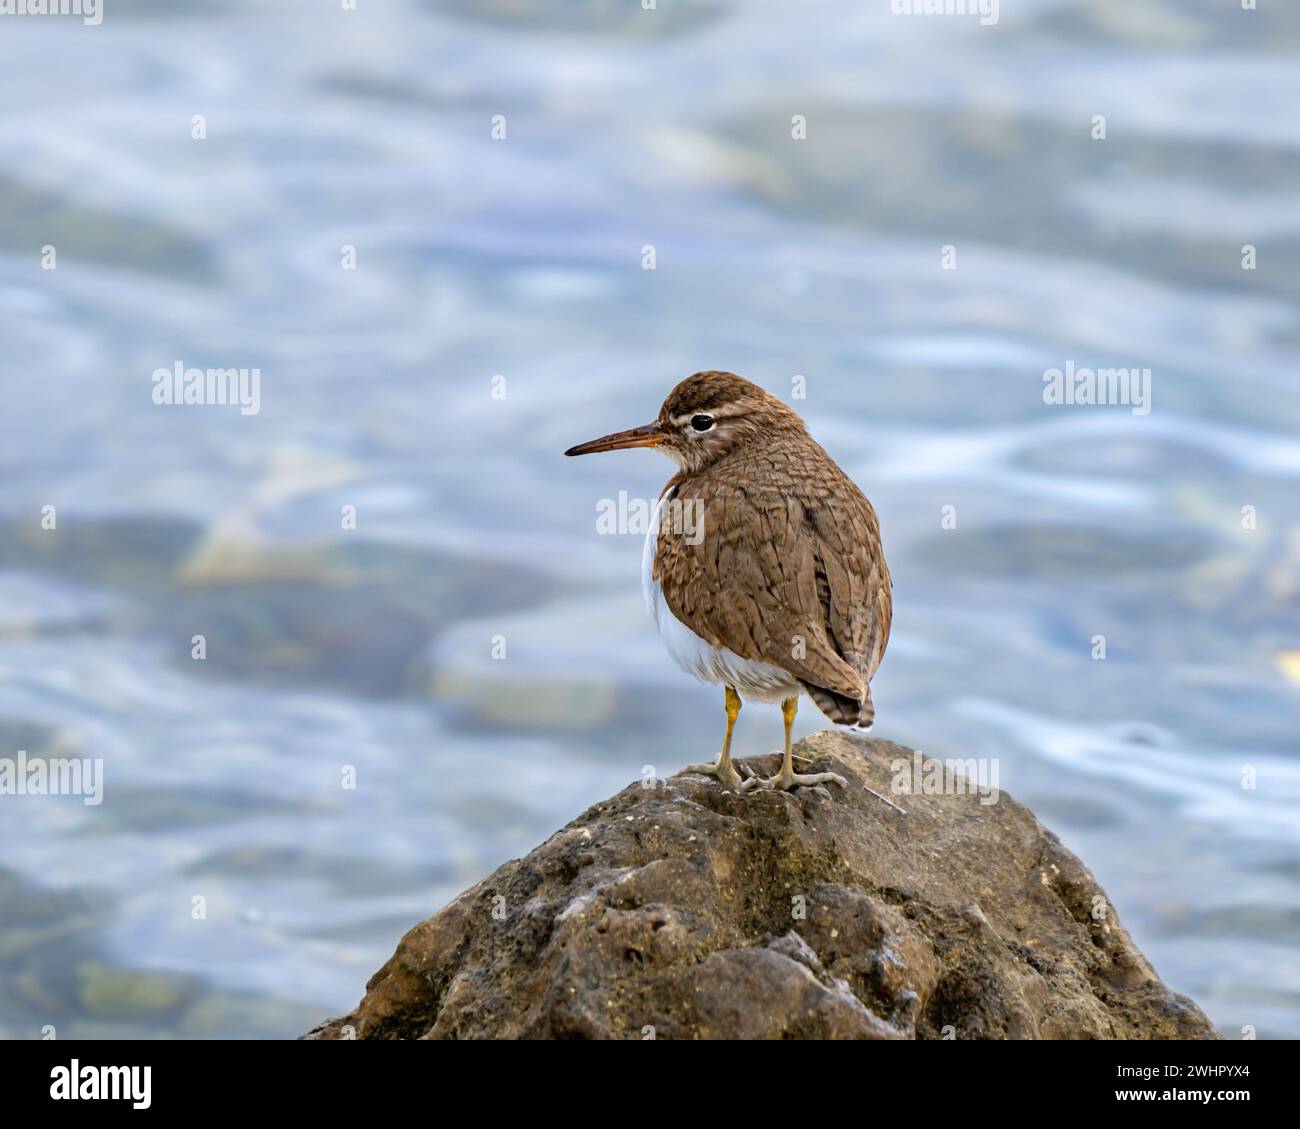 Sandpiper standing on a rock, Convoy Jetty Trail, Convoy Point, Biscayne National Park, Florida Stock Photo